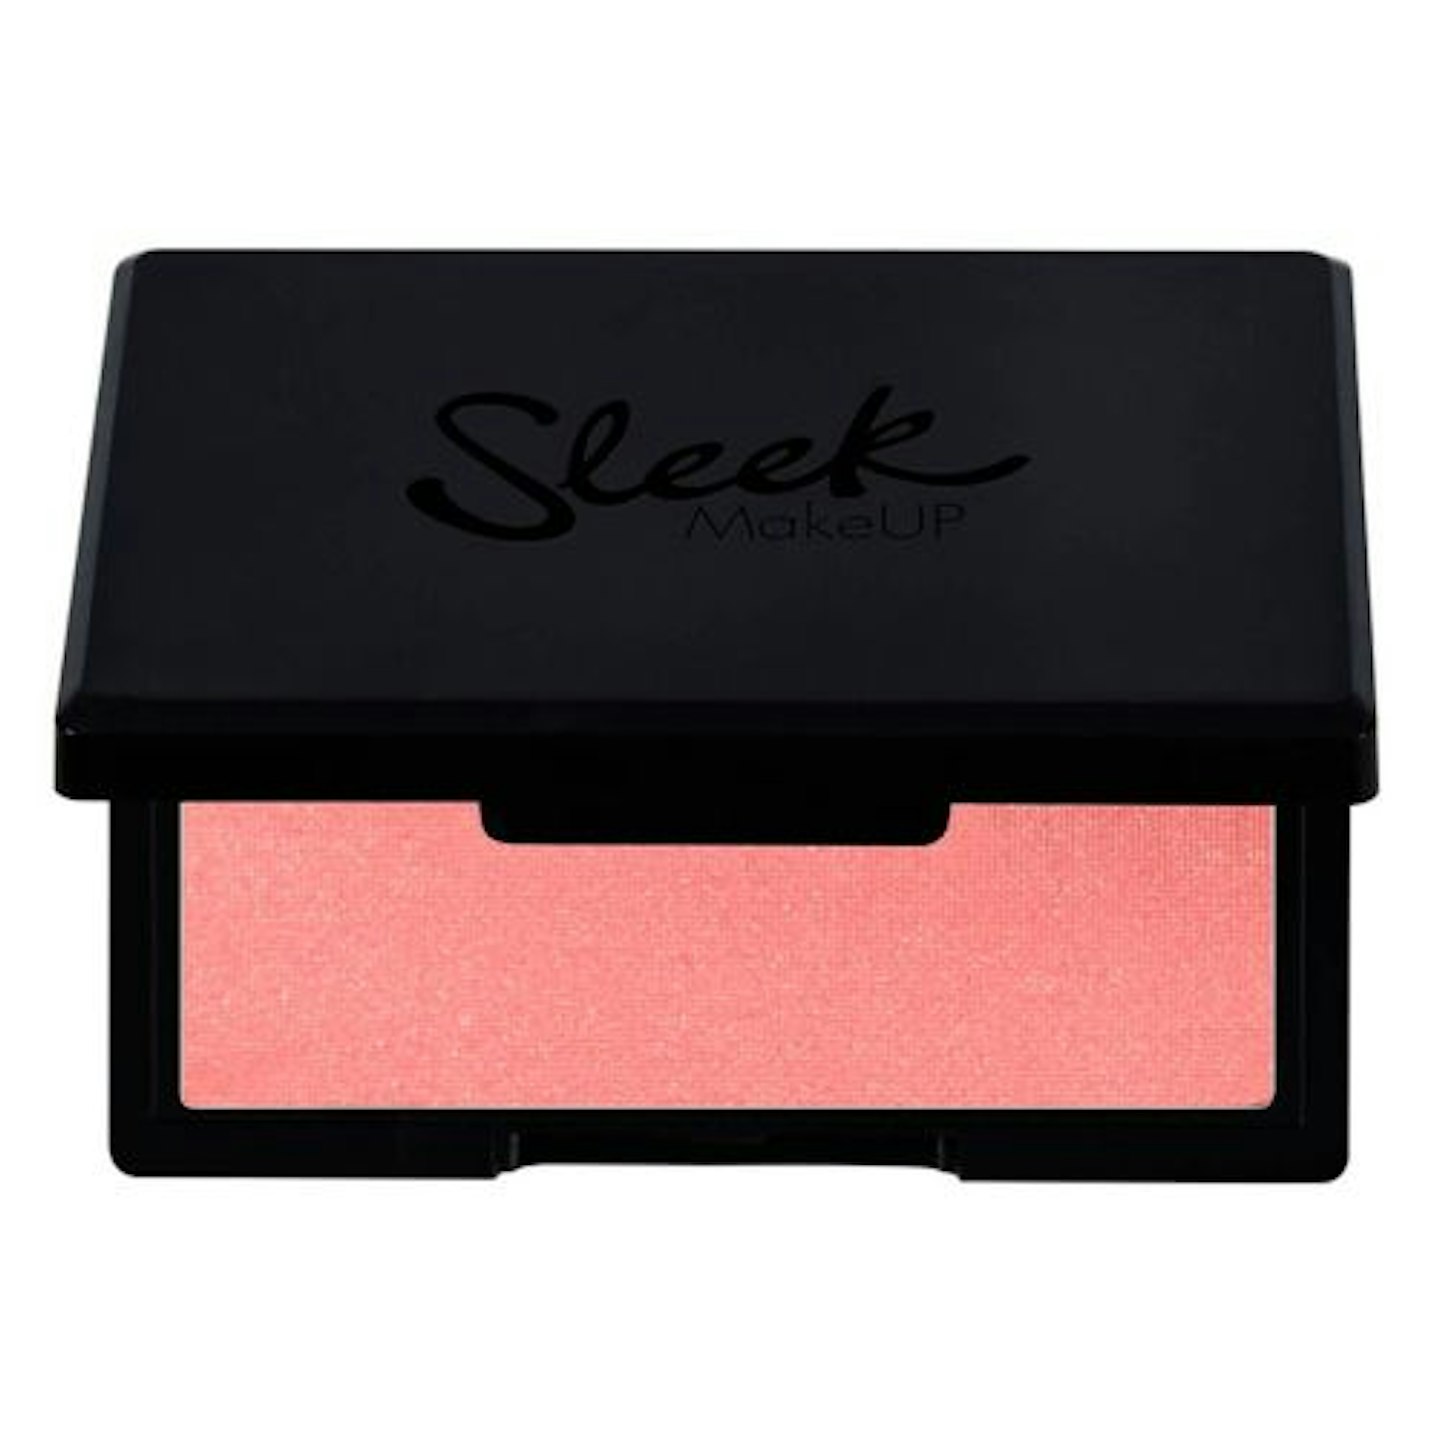 The best NARS Orgasm dupes from just £4.99